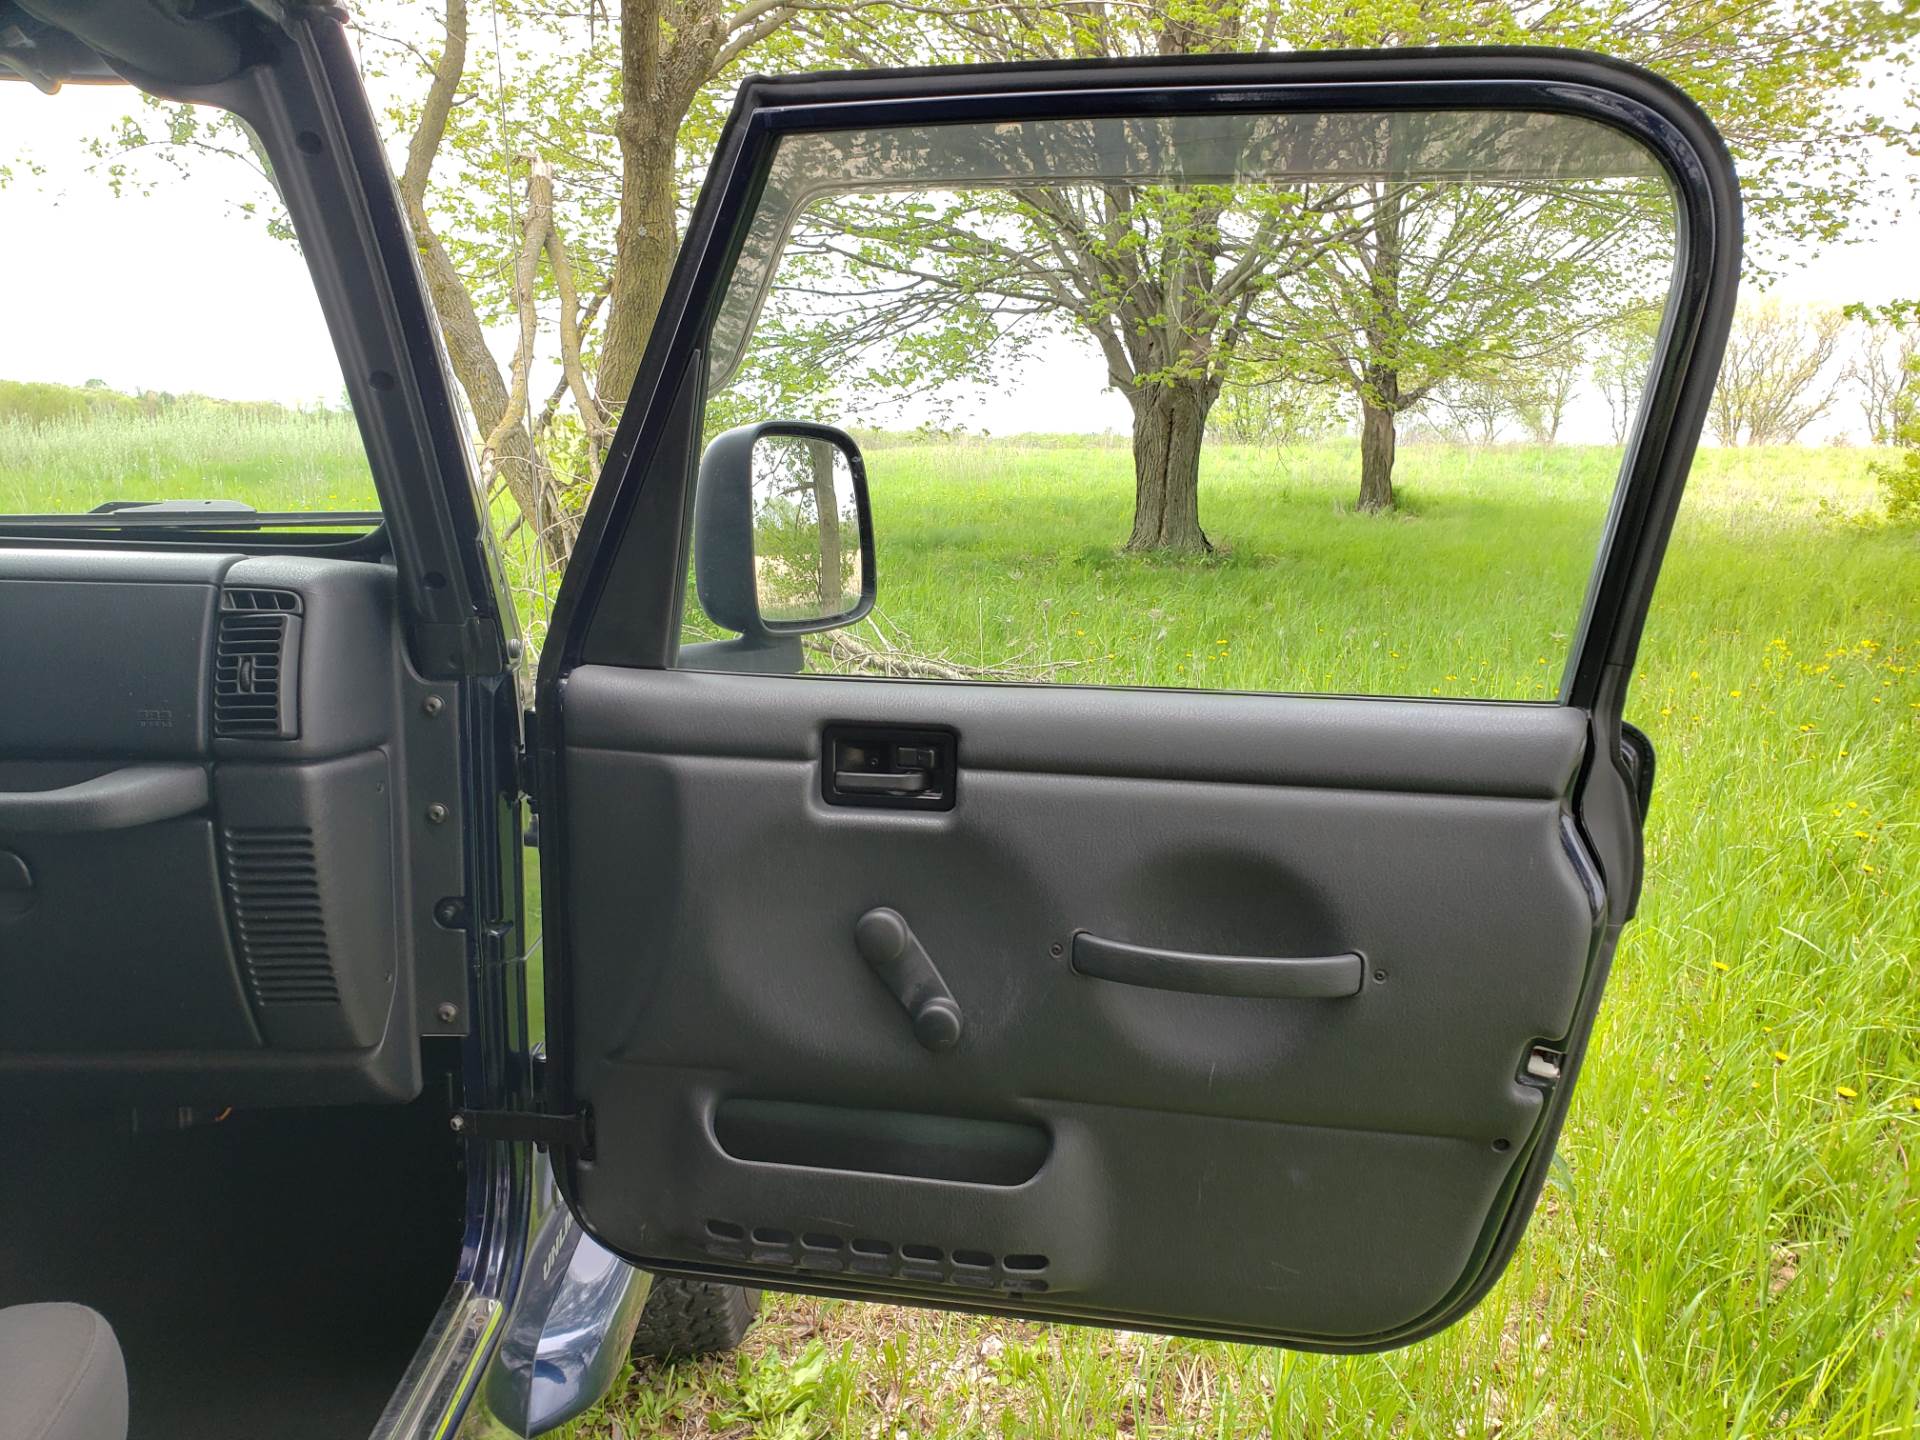 2006 Jeep Wrangler Unlimited 2dr SUV 4WD in Big Bend, Wisconsin - Photo 50